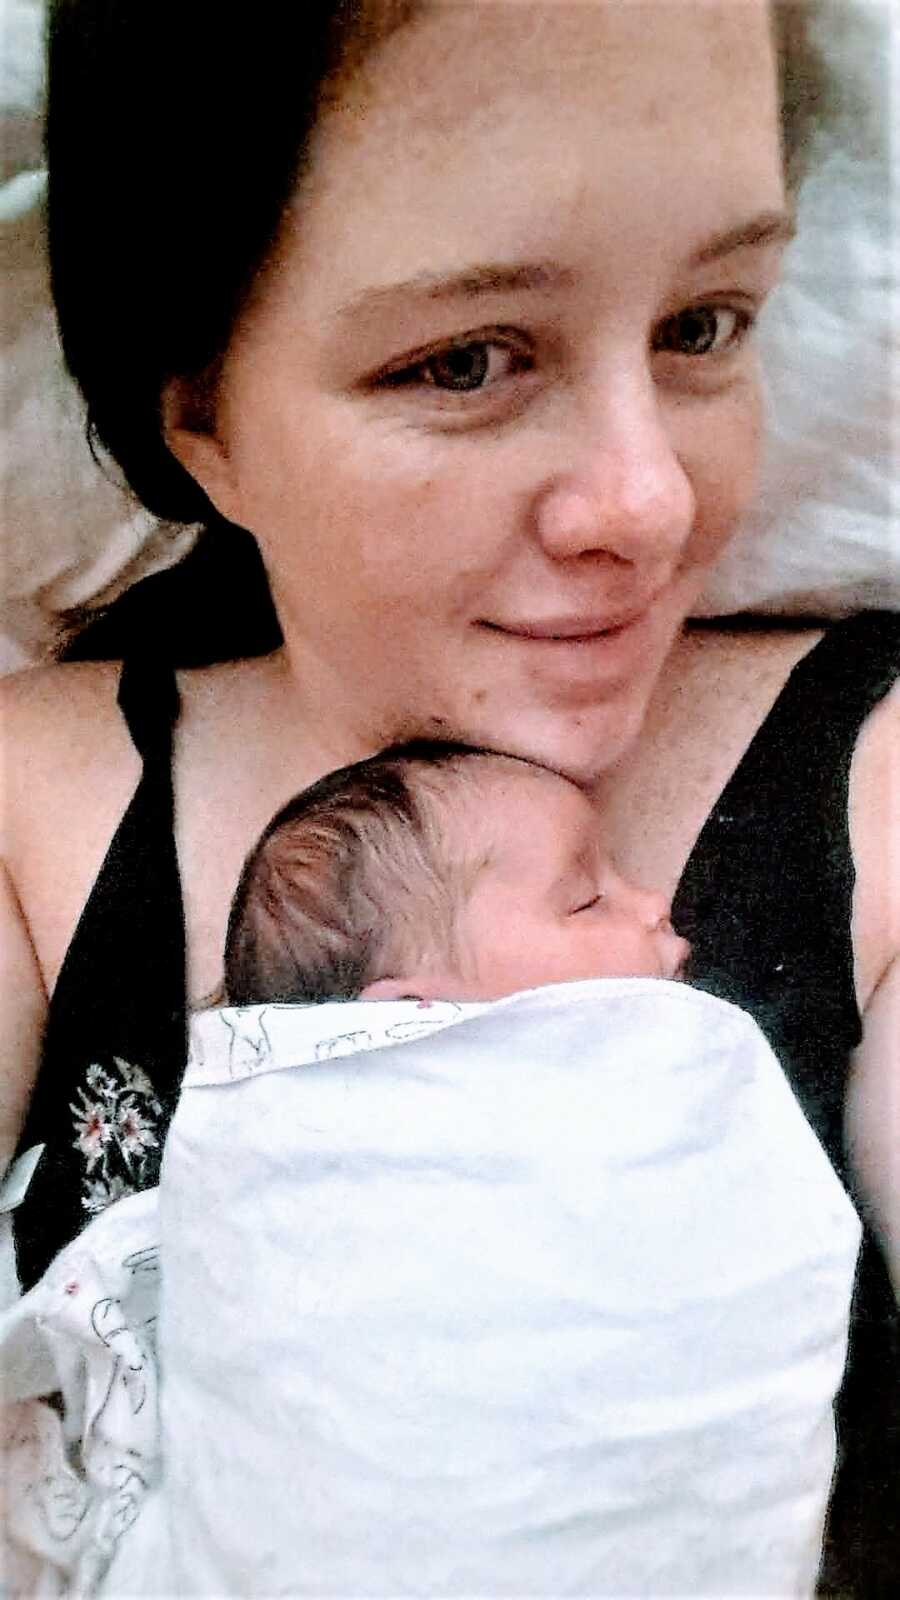 woman holding her baby close